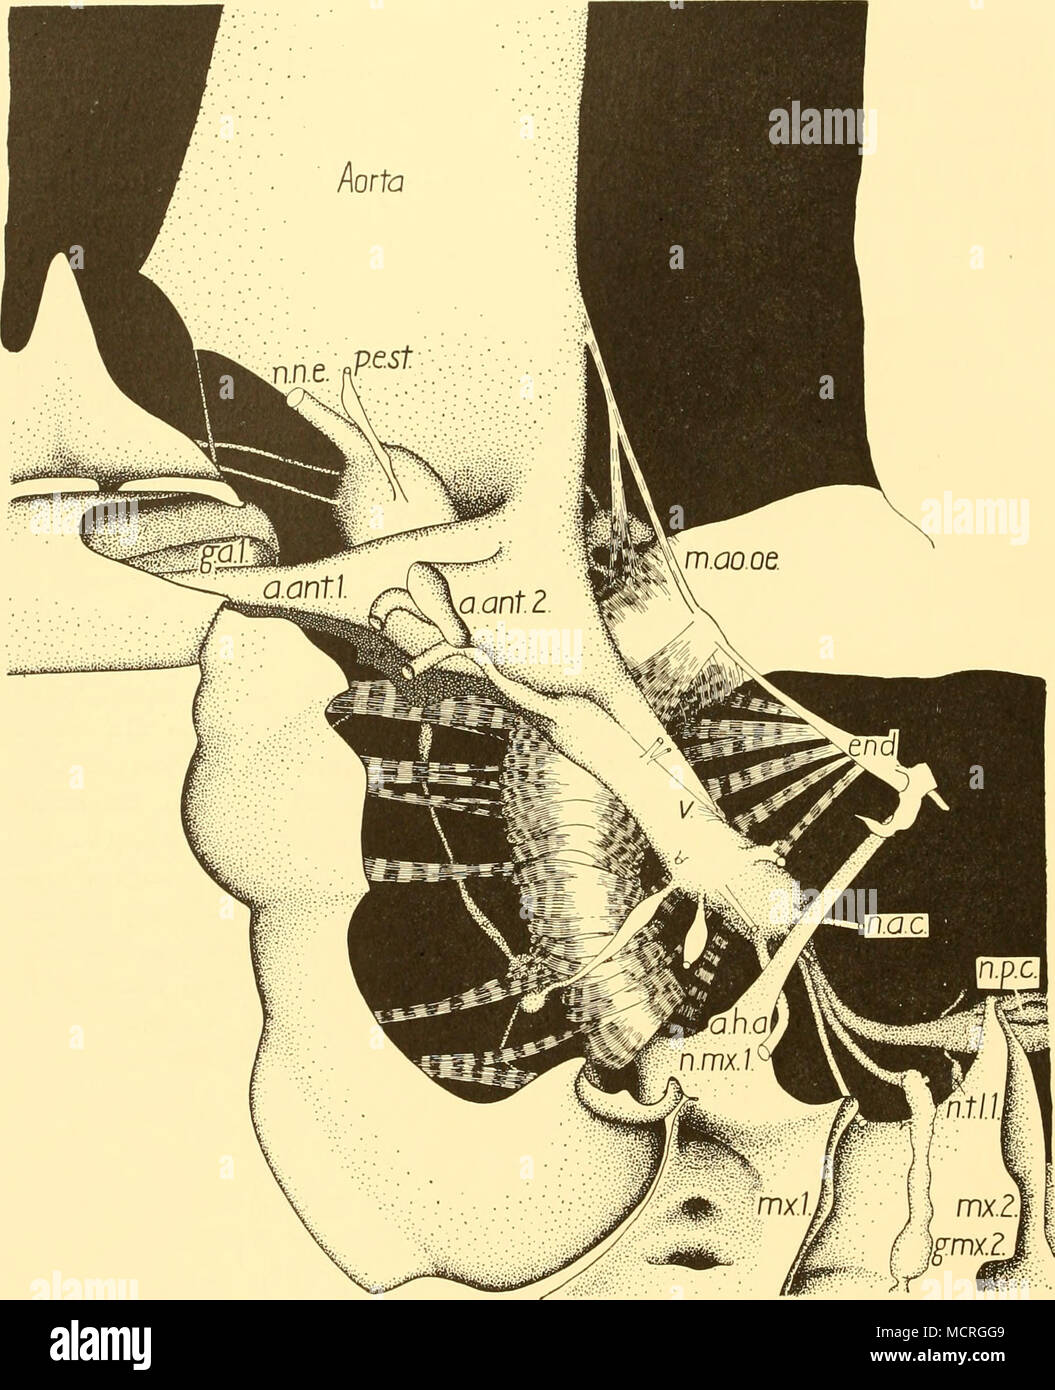 . Fig. ii. Reconstruction of anterior part of body from a parasagittal plane so chosen as to expose the aorta and the complete nerve ring surrounding the oesophagus. Only certain nerves have been labelled; the remainder can be identified by comparison with Fig. 13. a.ant.i, antennulary artery; a.ant.2, antennal artery; a.h.a. anterior hypostomal apodeme; end. endosternite; g.a.i, basal ganglion of antennule; g.tnx.z, basal ganglion of maxilla; m.ao.oe. aortic-oesophageal muscle; n.n.e. nerve to lateral component of nauplius eye; mx.i, maxillule; mx.2, maxilla; n.a.c. anterior cardiac nerve; n. Stock Photo